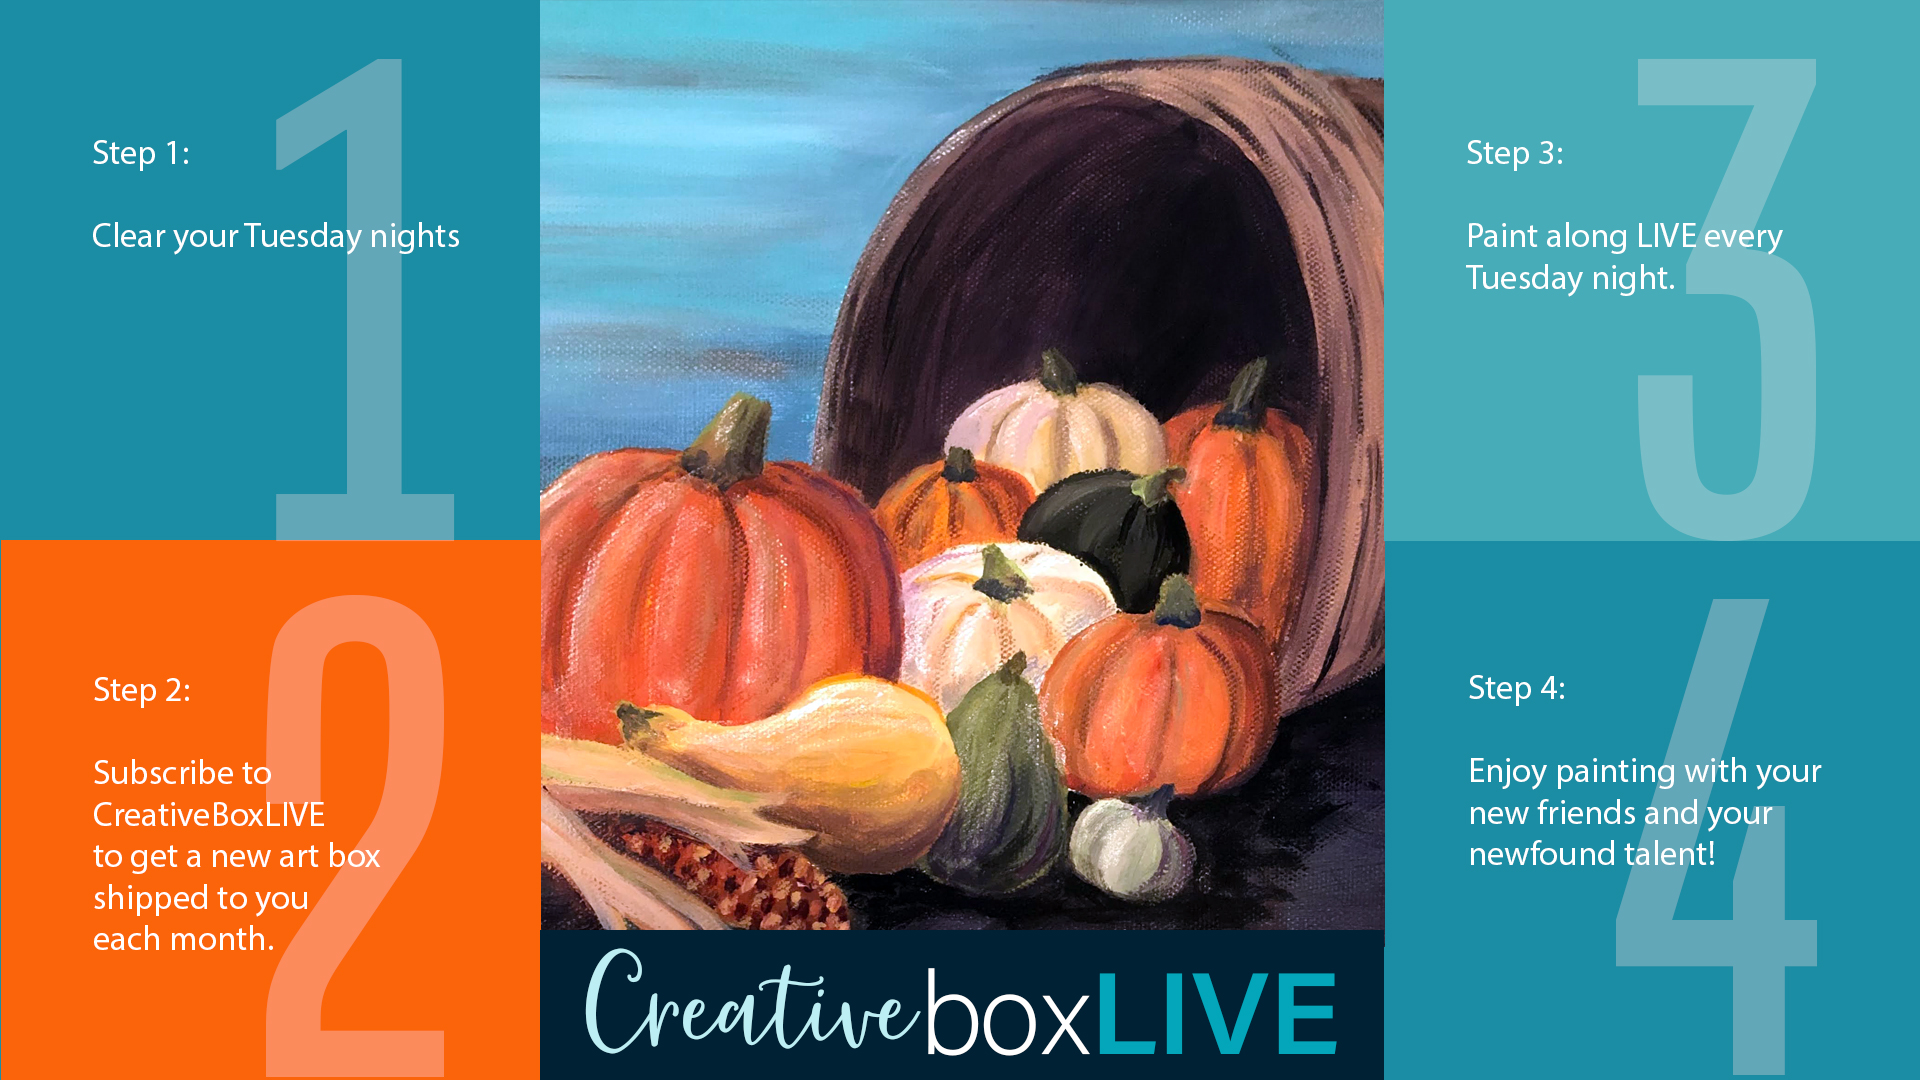 Oh My Gourd CBL with CreativeBoxLIVE from Creatively Uncorked http://creativelyuncorked.com/